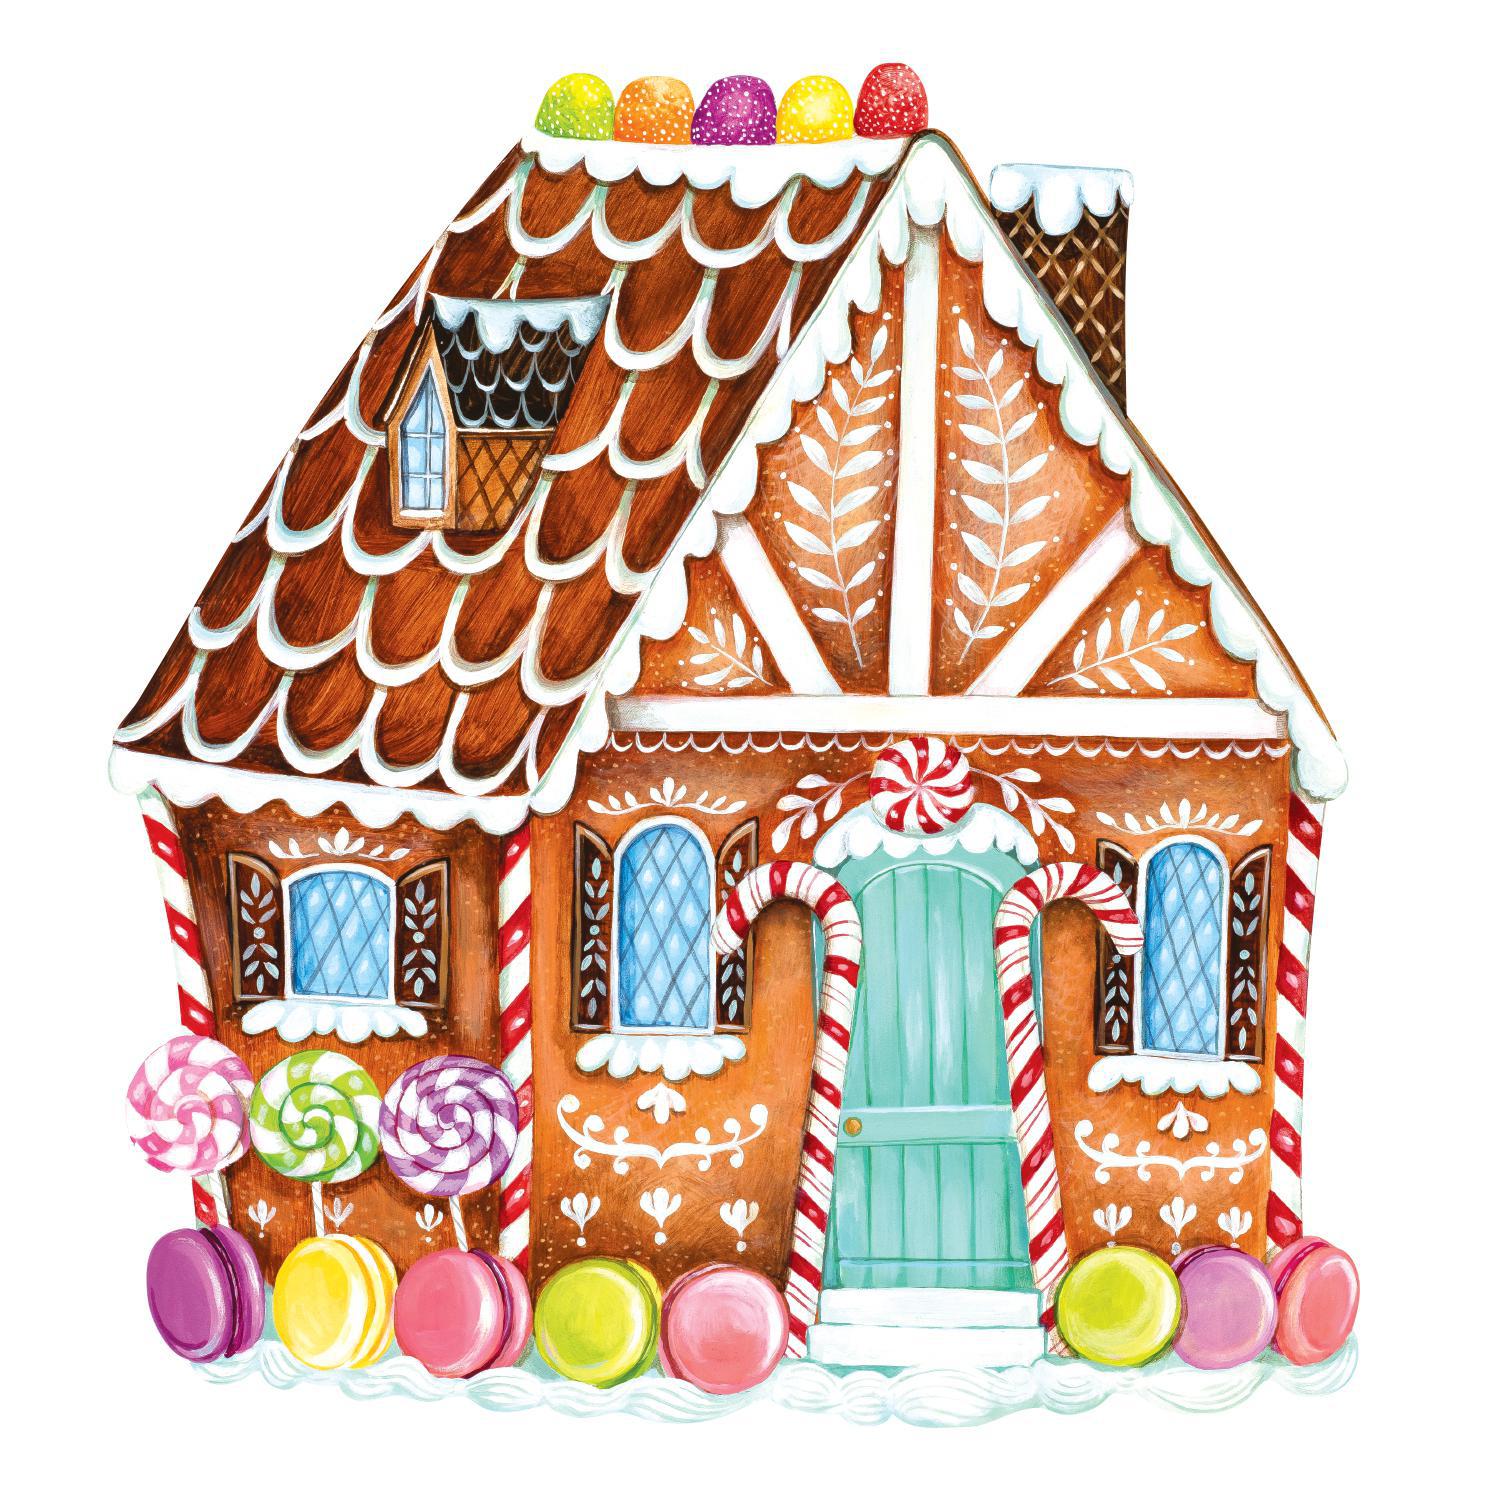 Placemat, Die-Cut Gingerbread House